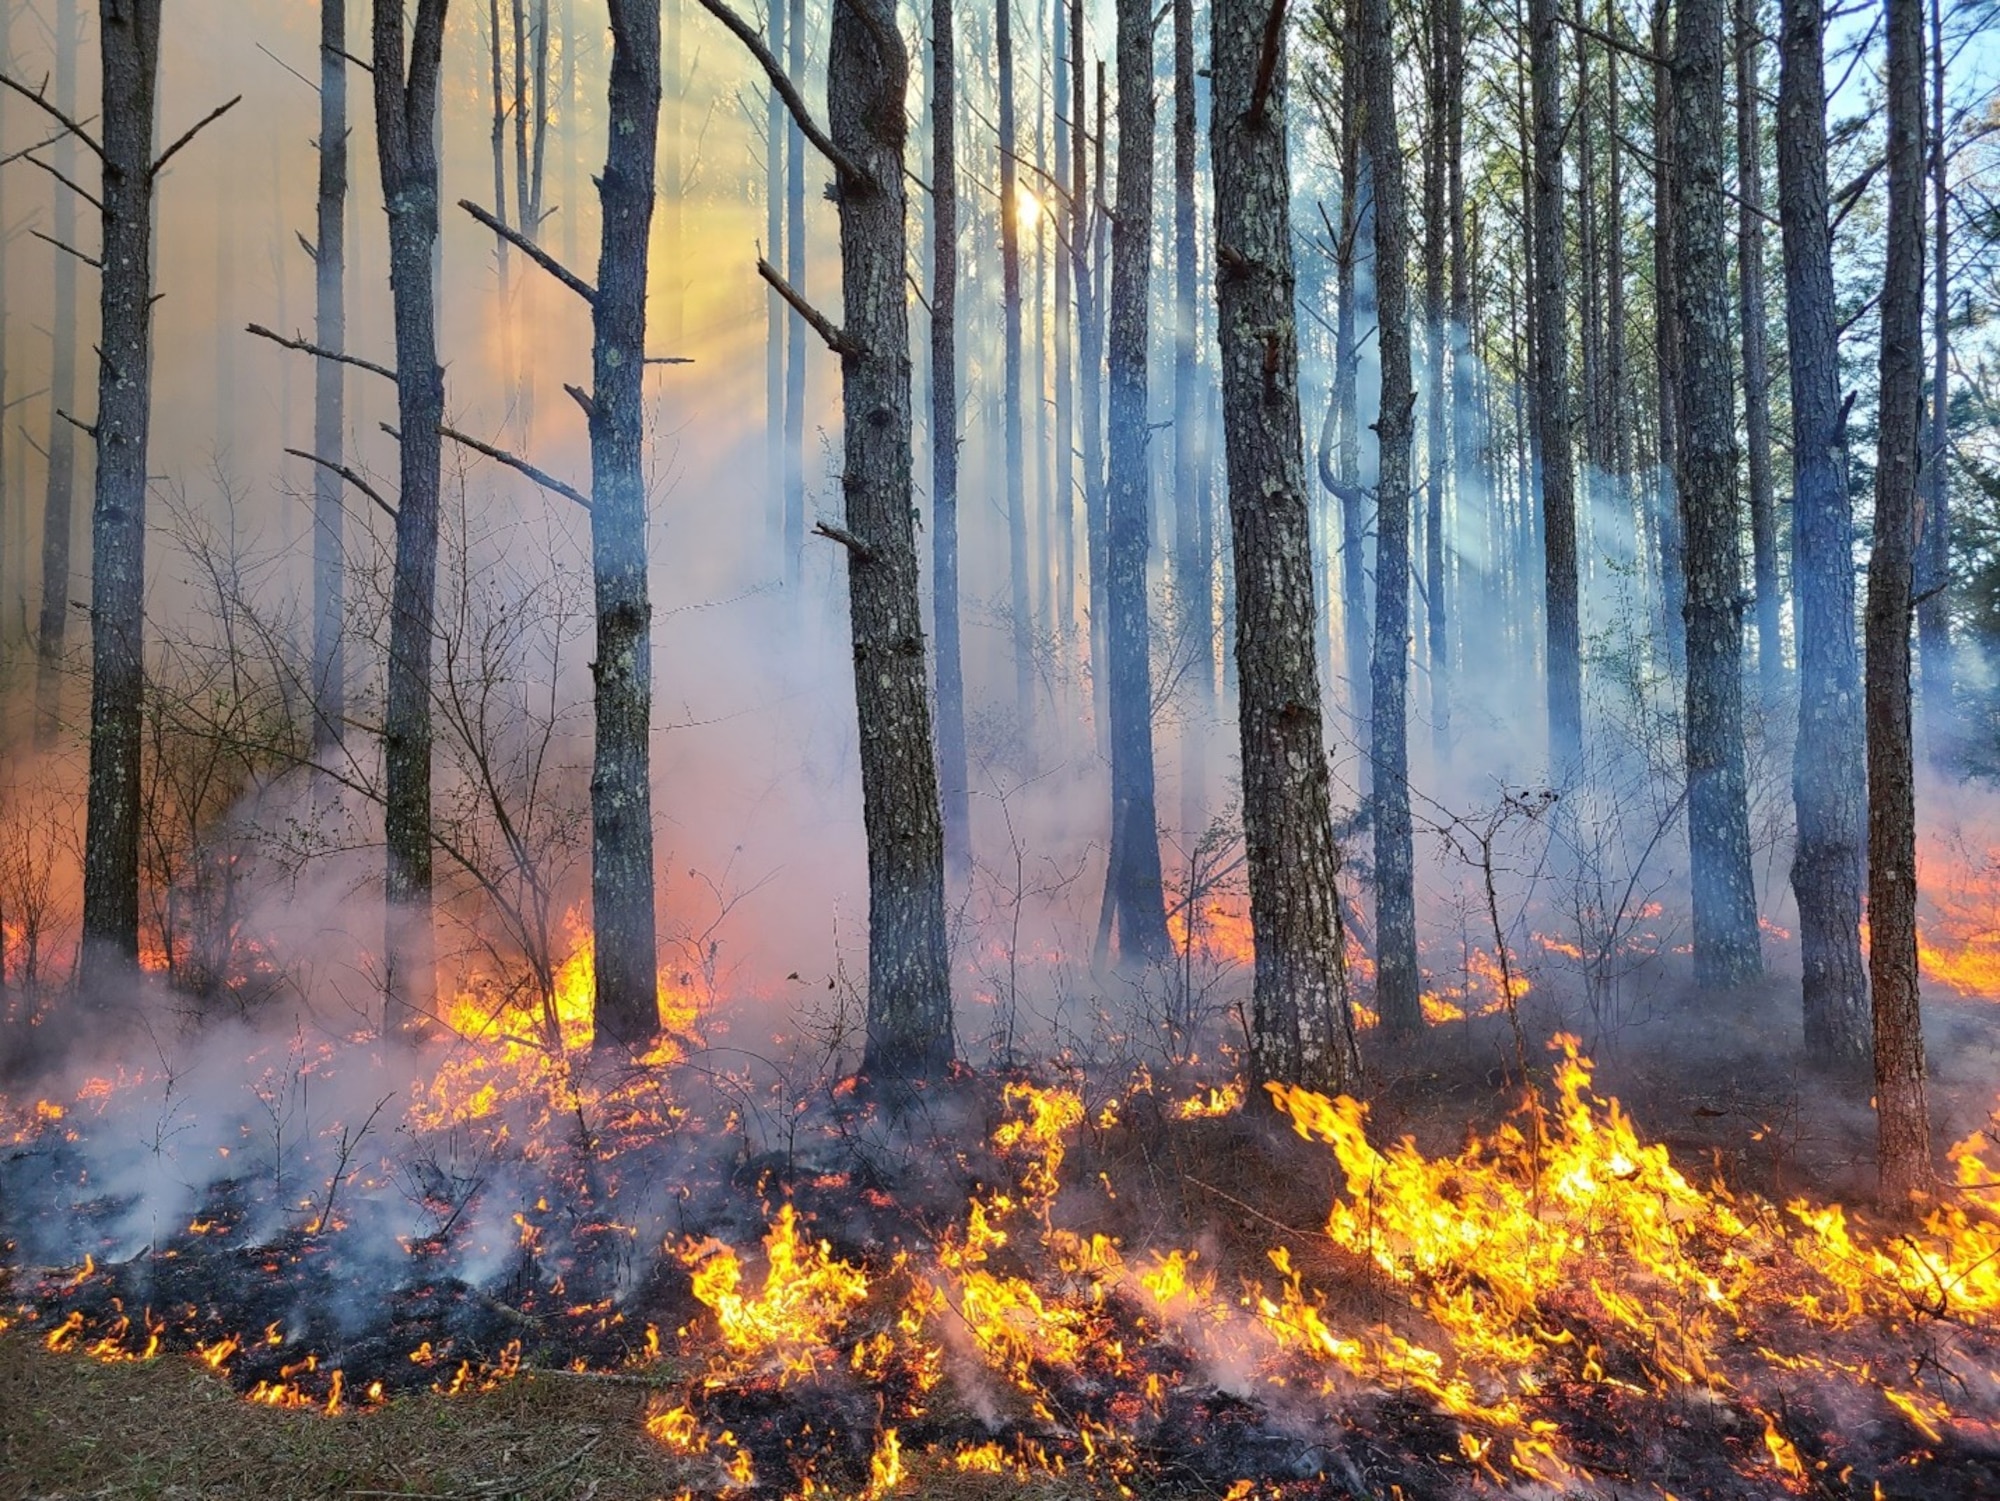 A prescribed fire burns at Arnold Air Force Base, Tennessee, March 2021. This spring, the natural resources staff at Arnold Air Force Base will work with the Air Force Wildland Fire Branch to conduct prescribed fires, or controlled burns, across Arnold. Prescribed fire allows land managers to alter and improve the native ecosystems without utilizing more costly methods such as mulching, mowing and herbicide applications. (Courtesy photo by Brenton Berlin)